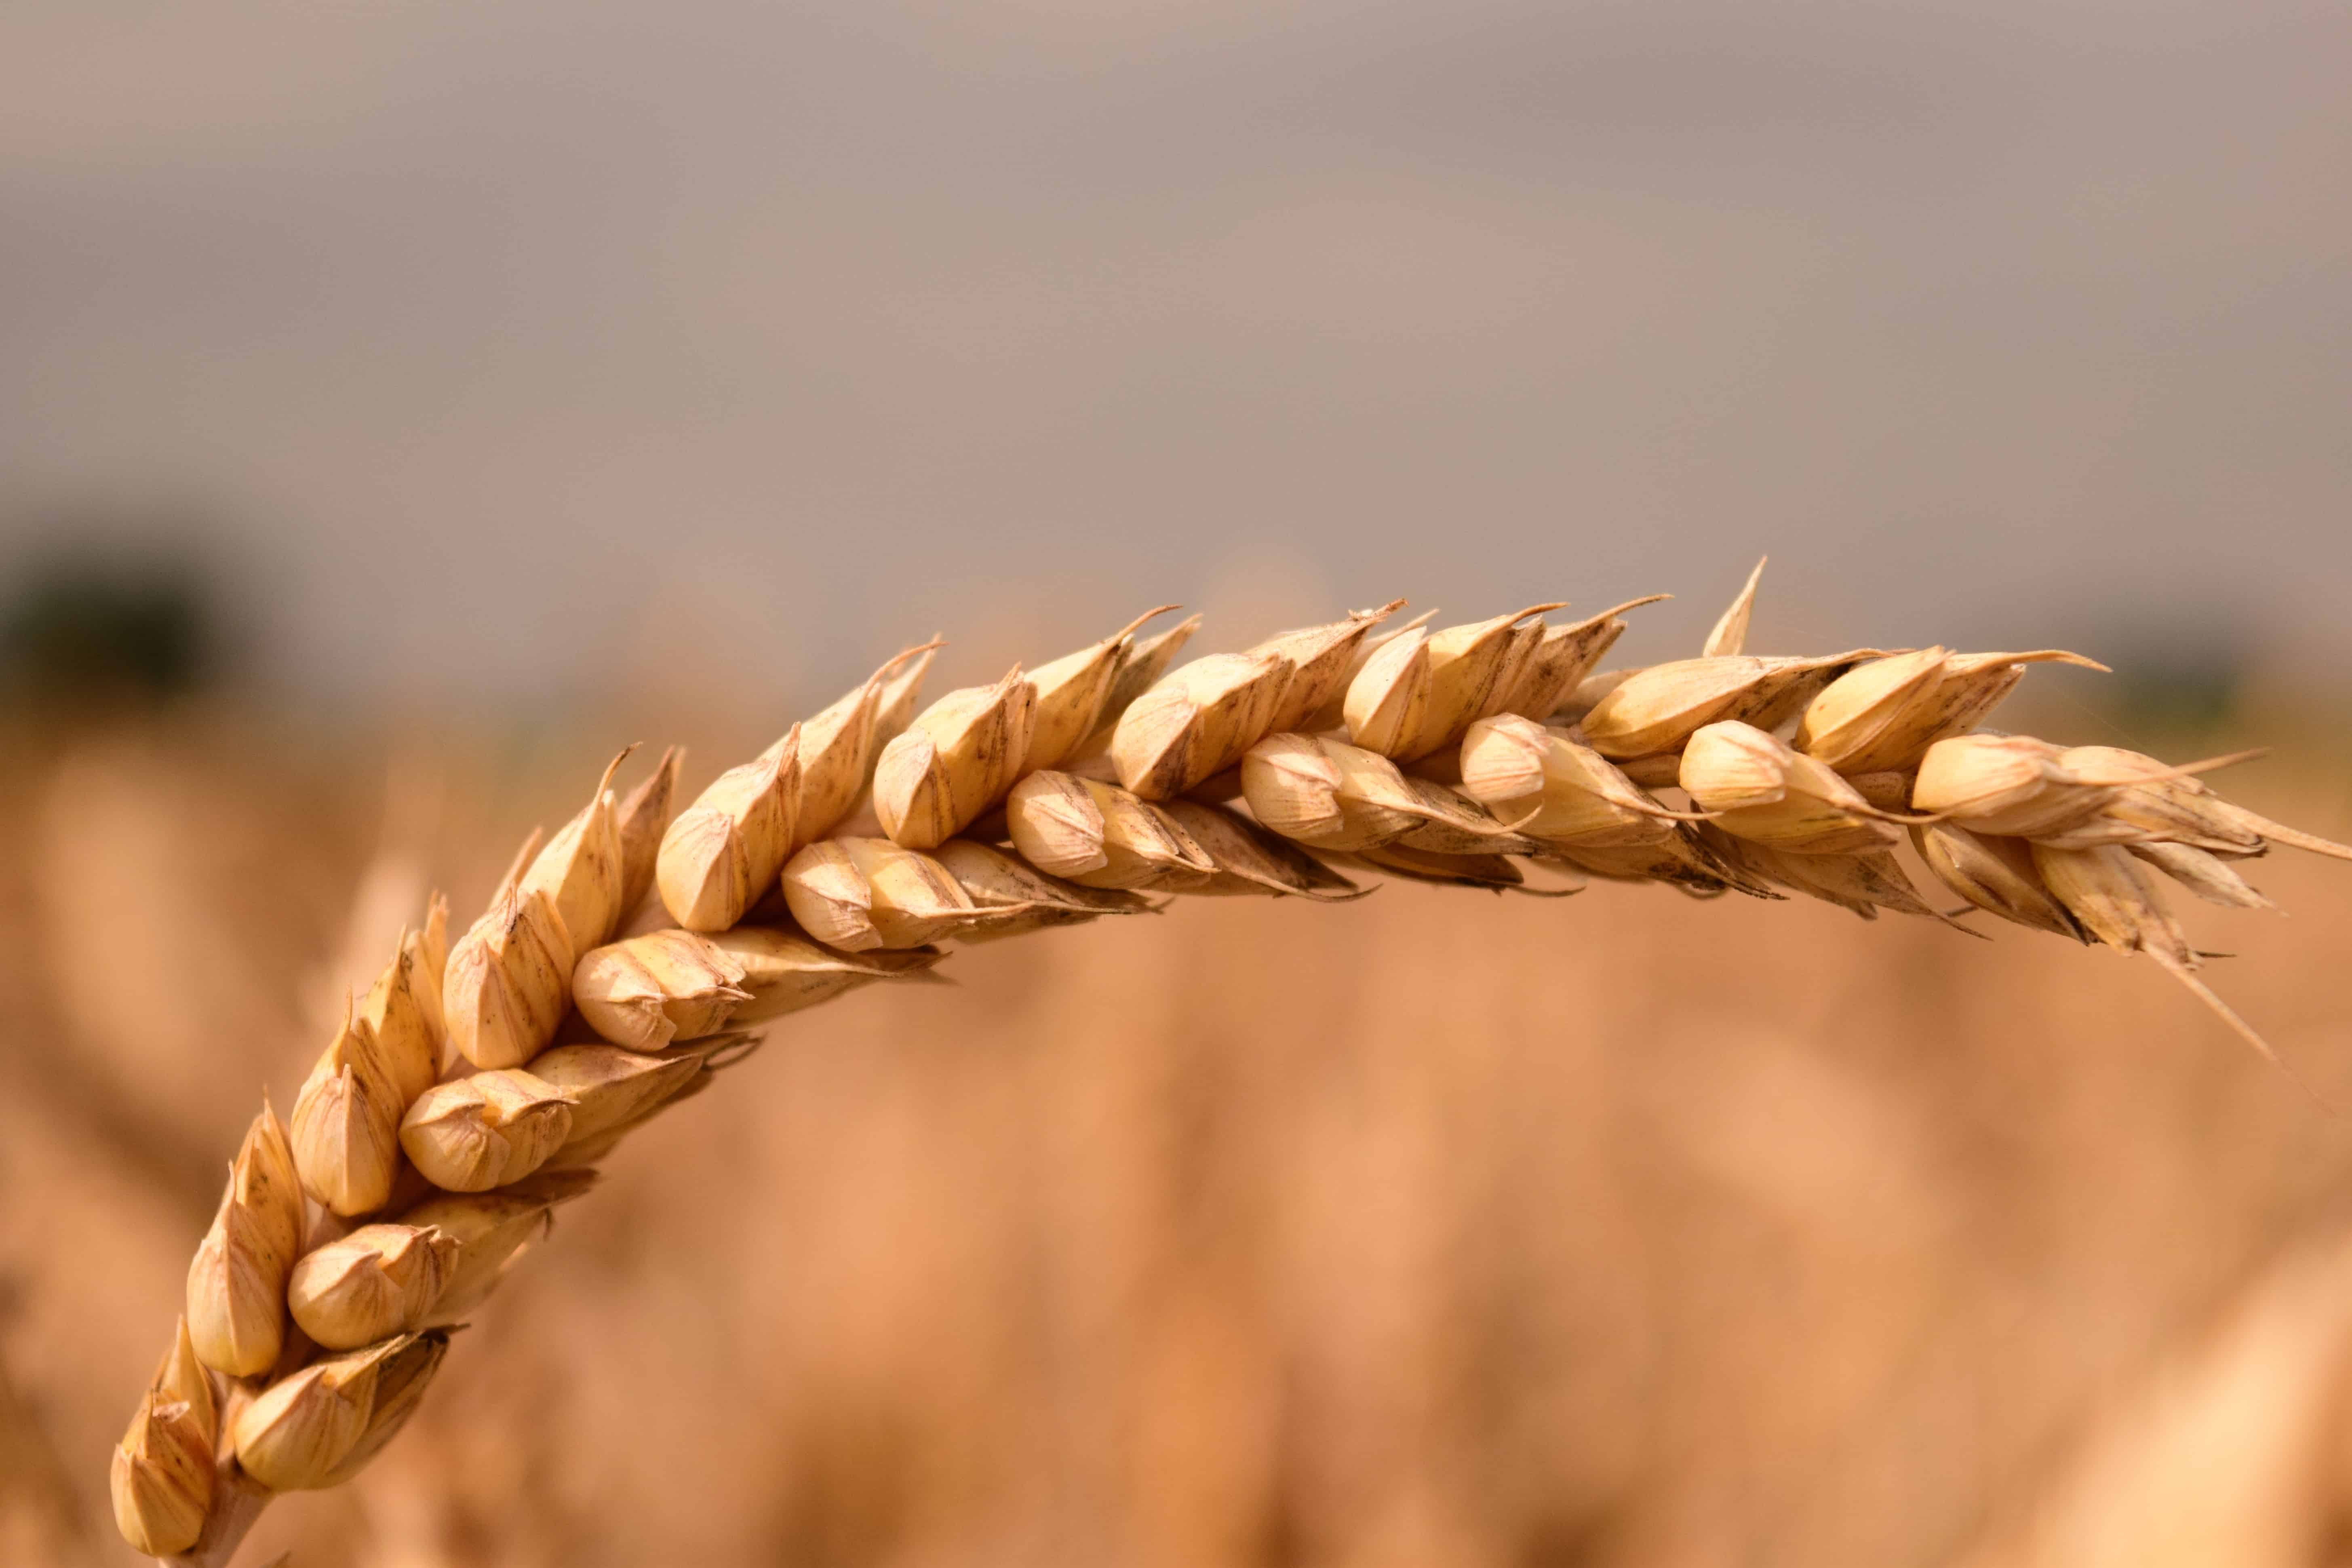 Free picture: grain, agriculture, plant, food, summer, dry, outdoor ...